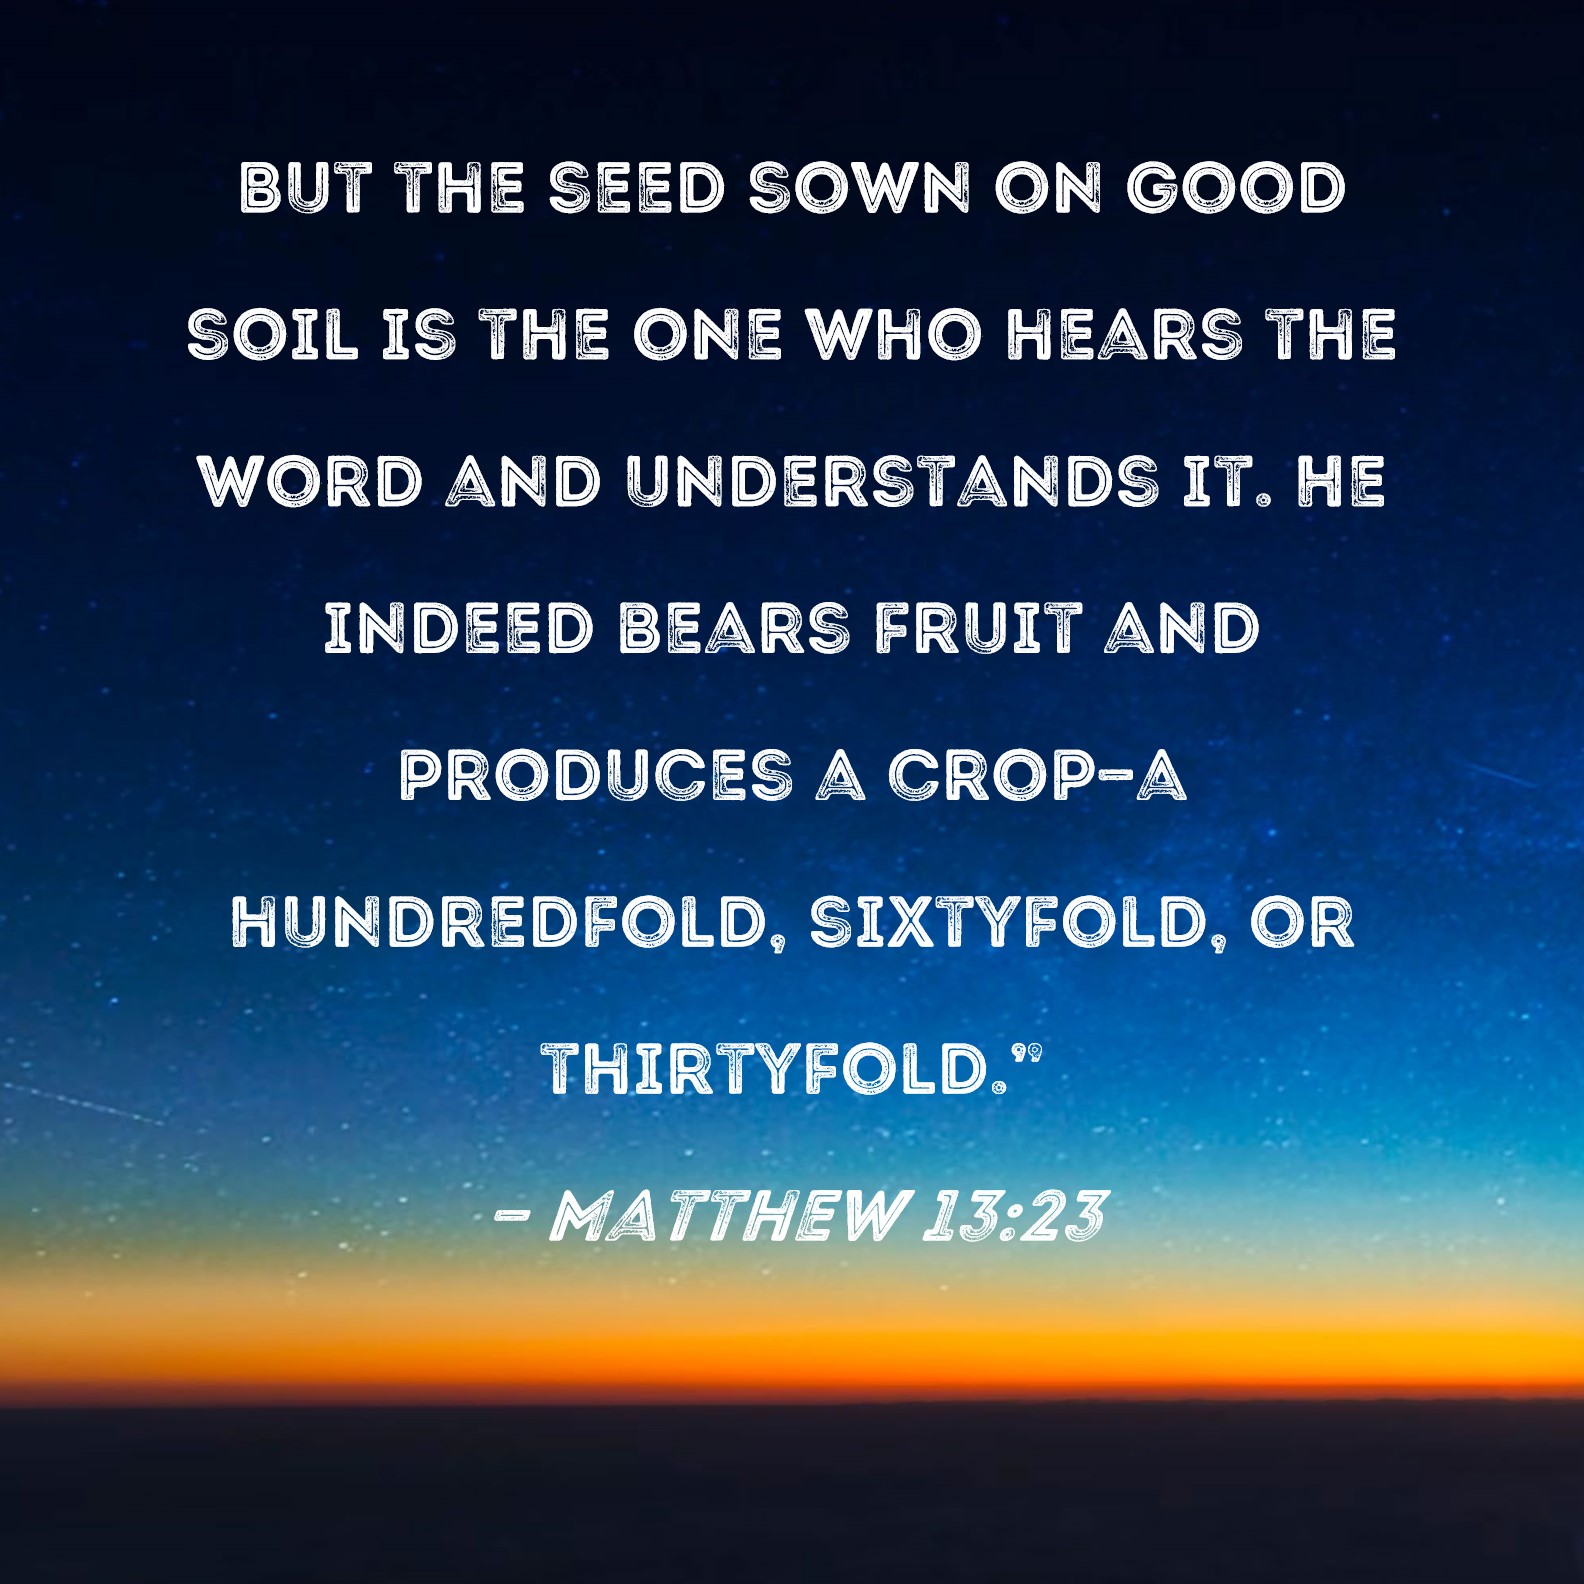 Young Catholics on X: 🌾🌱 But some seed fell on rich soil, and produced  fruit, a hundred or sixty or thirtyfold. Whoever has ears ought to hear. 🍃    / X